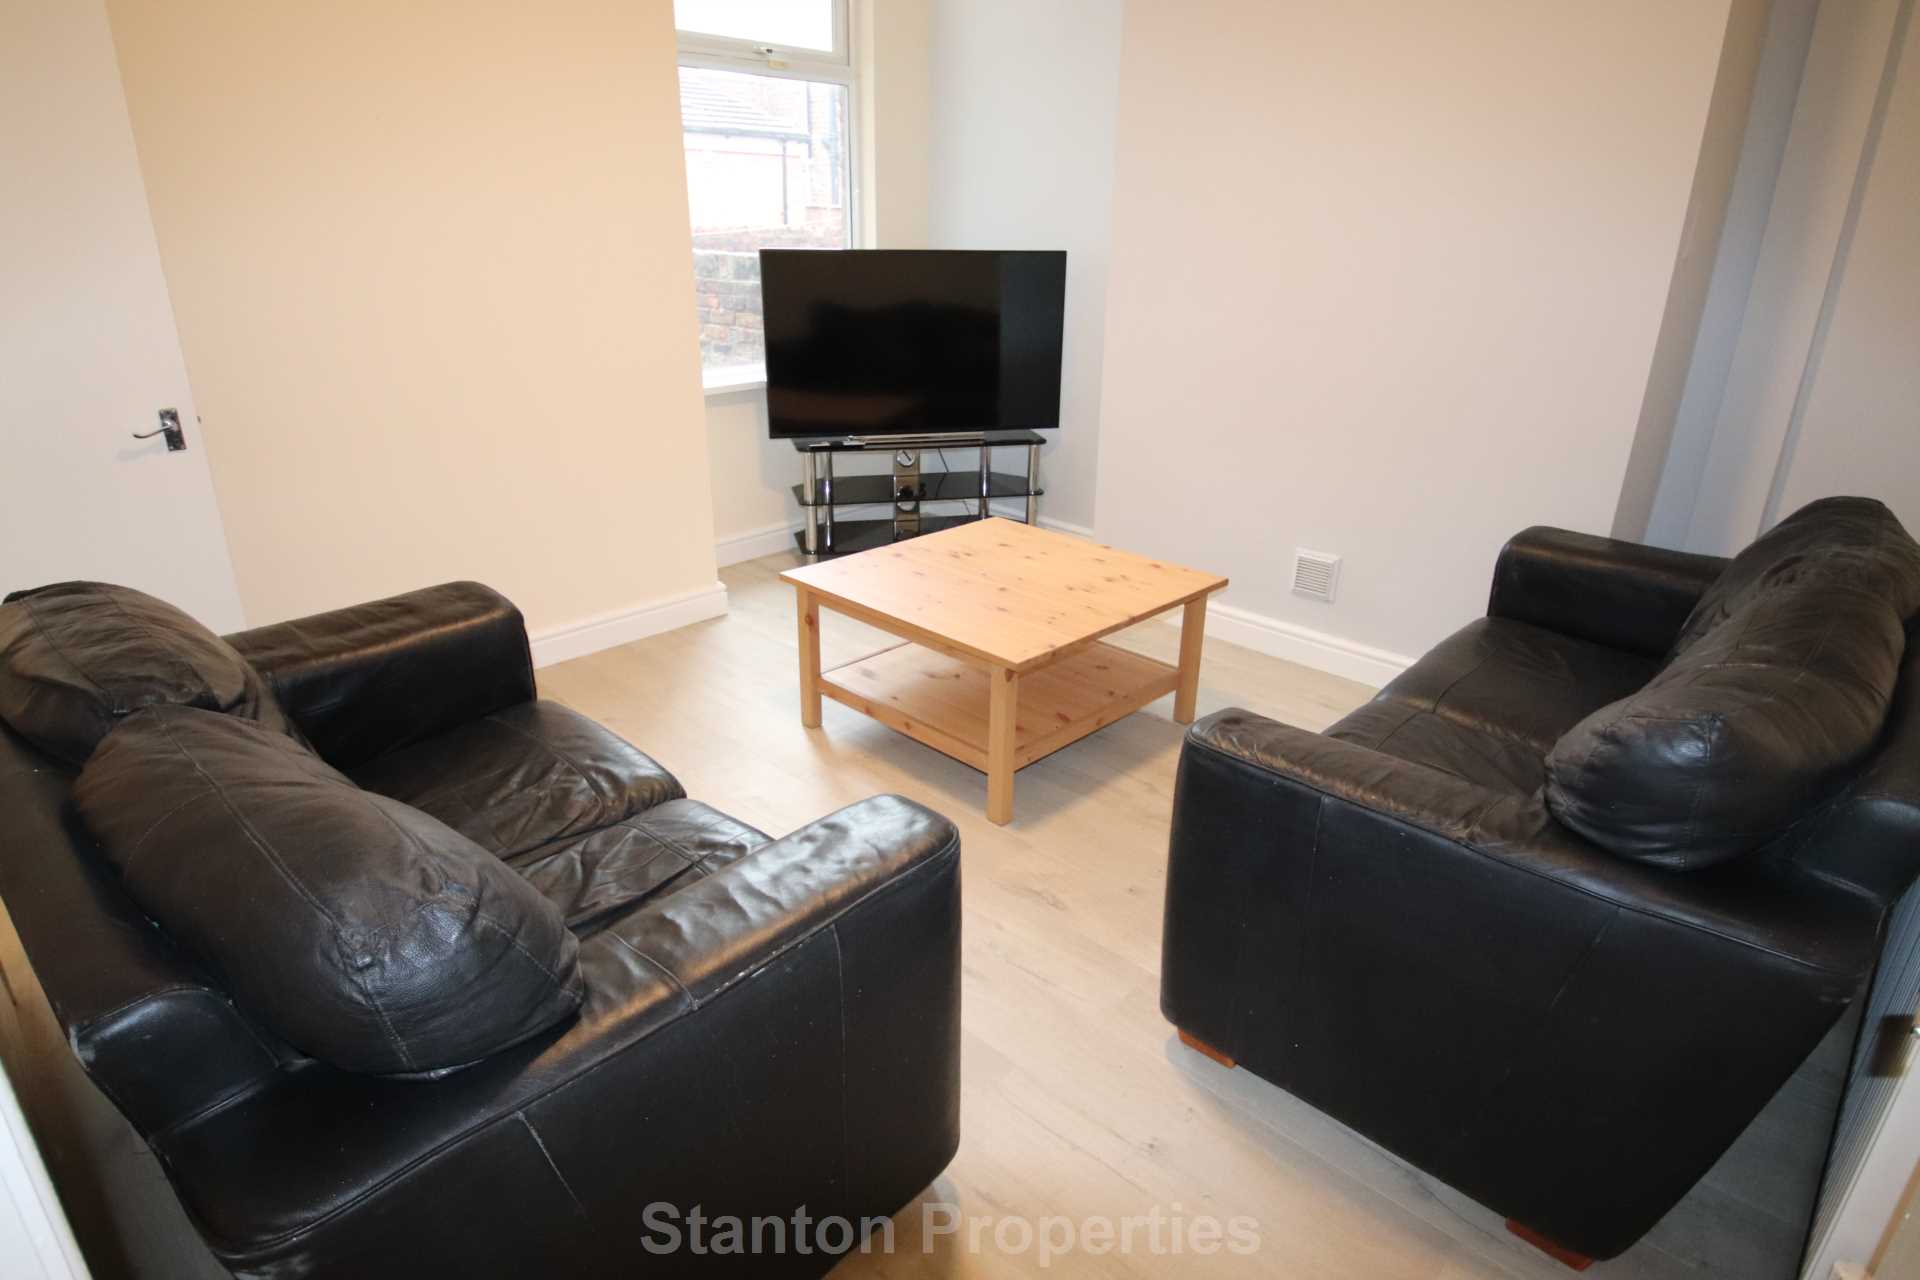 See Video Tour, £115 pppw, Moseley Road, Fallowfield, M14 6PB, Image 1